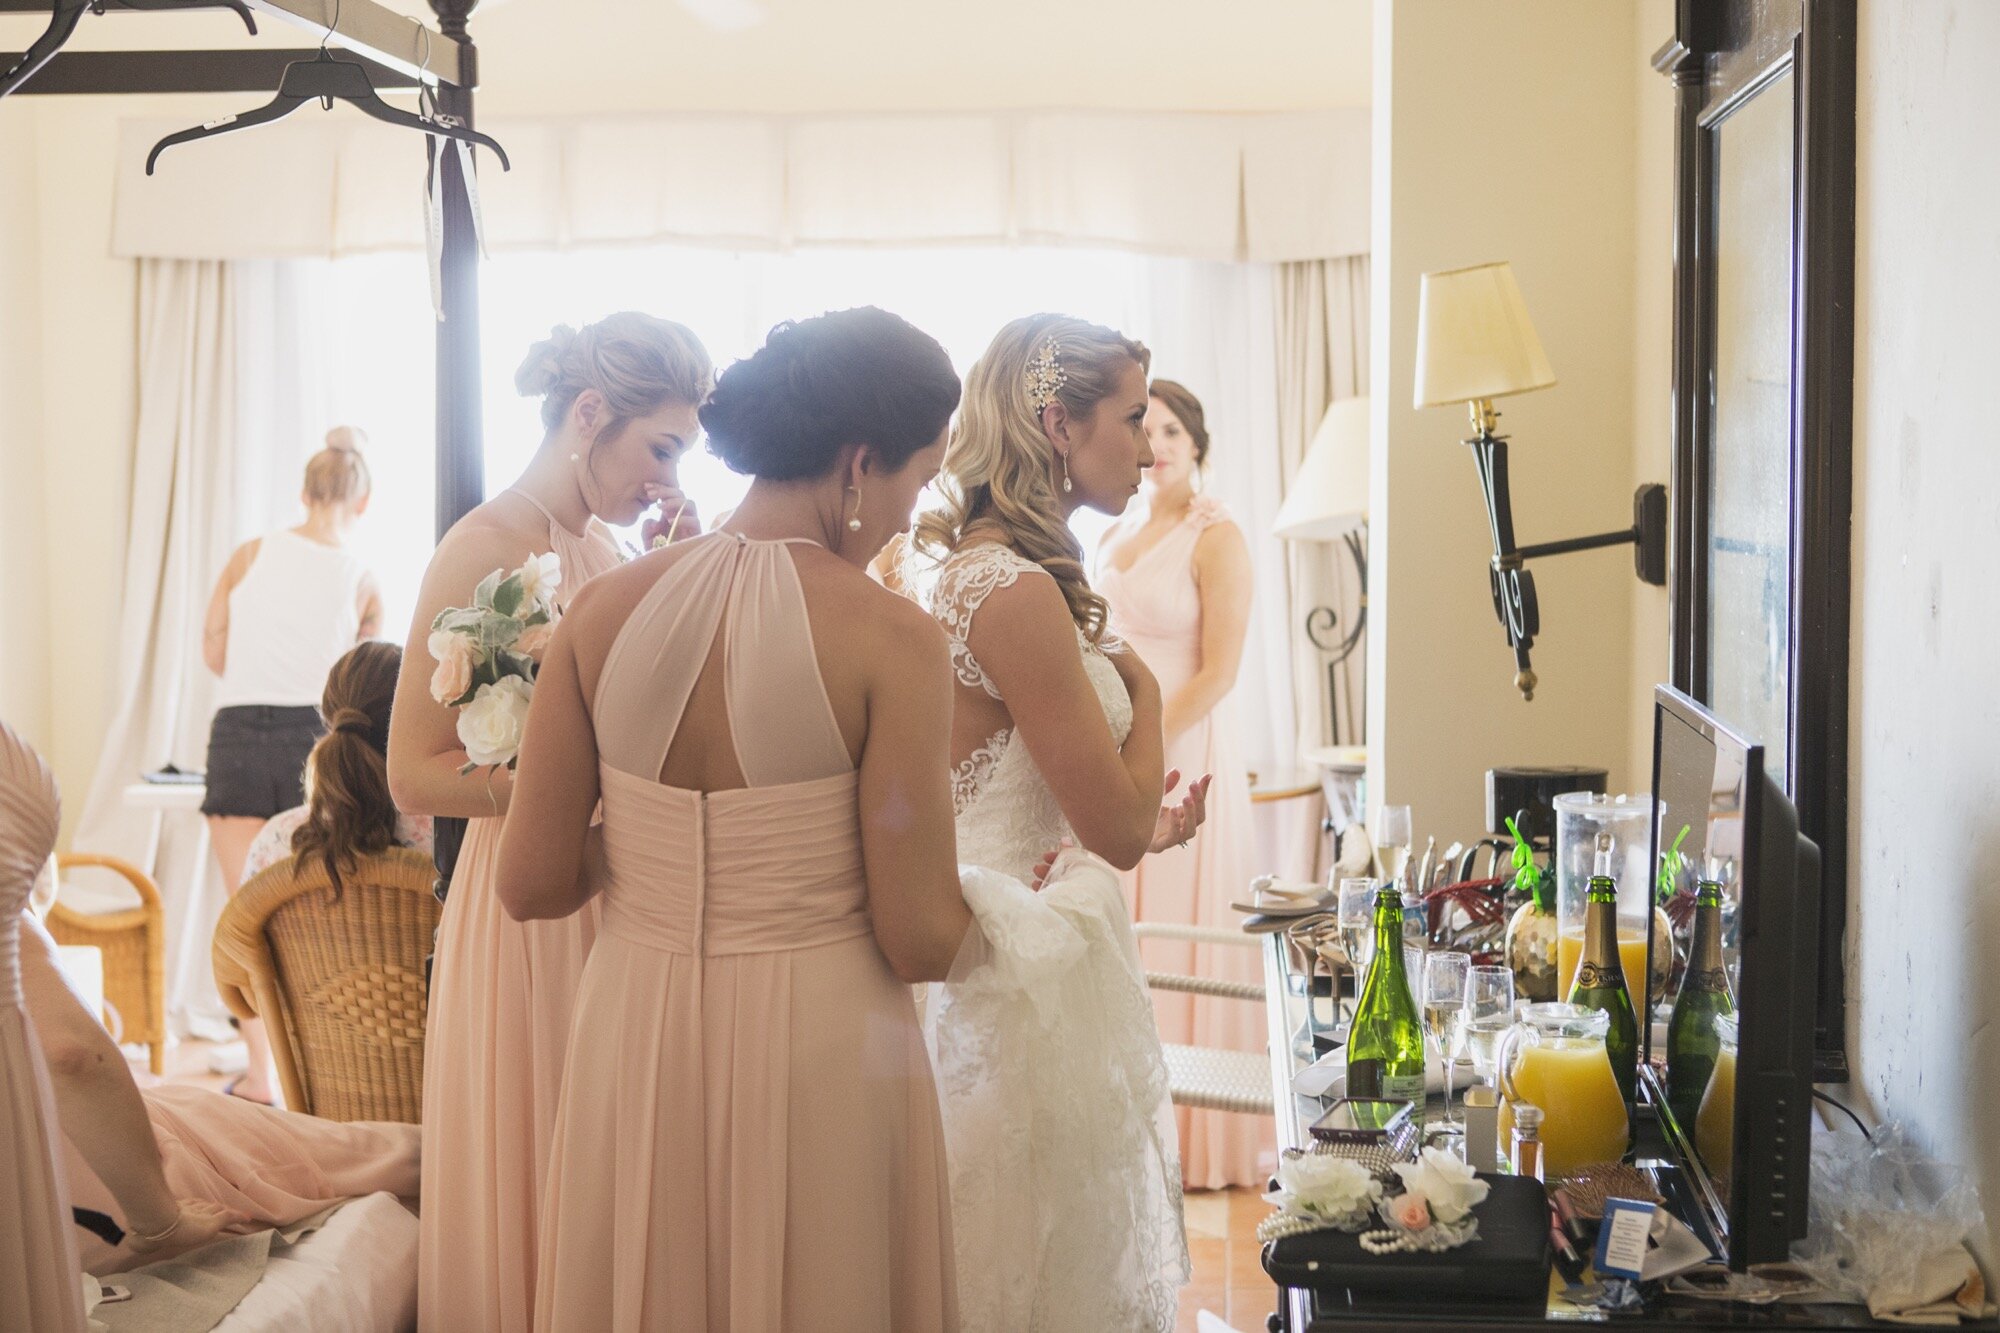 bridal party getting ready in hotel room.jpg